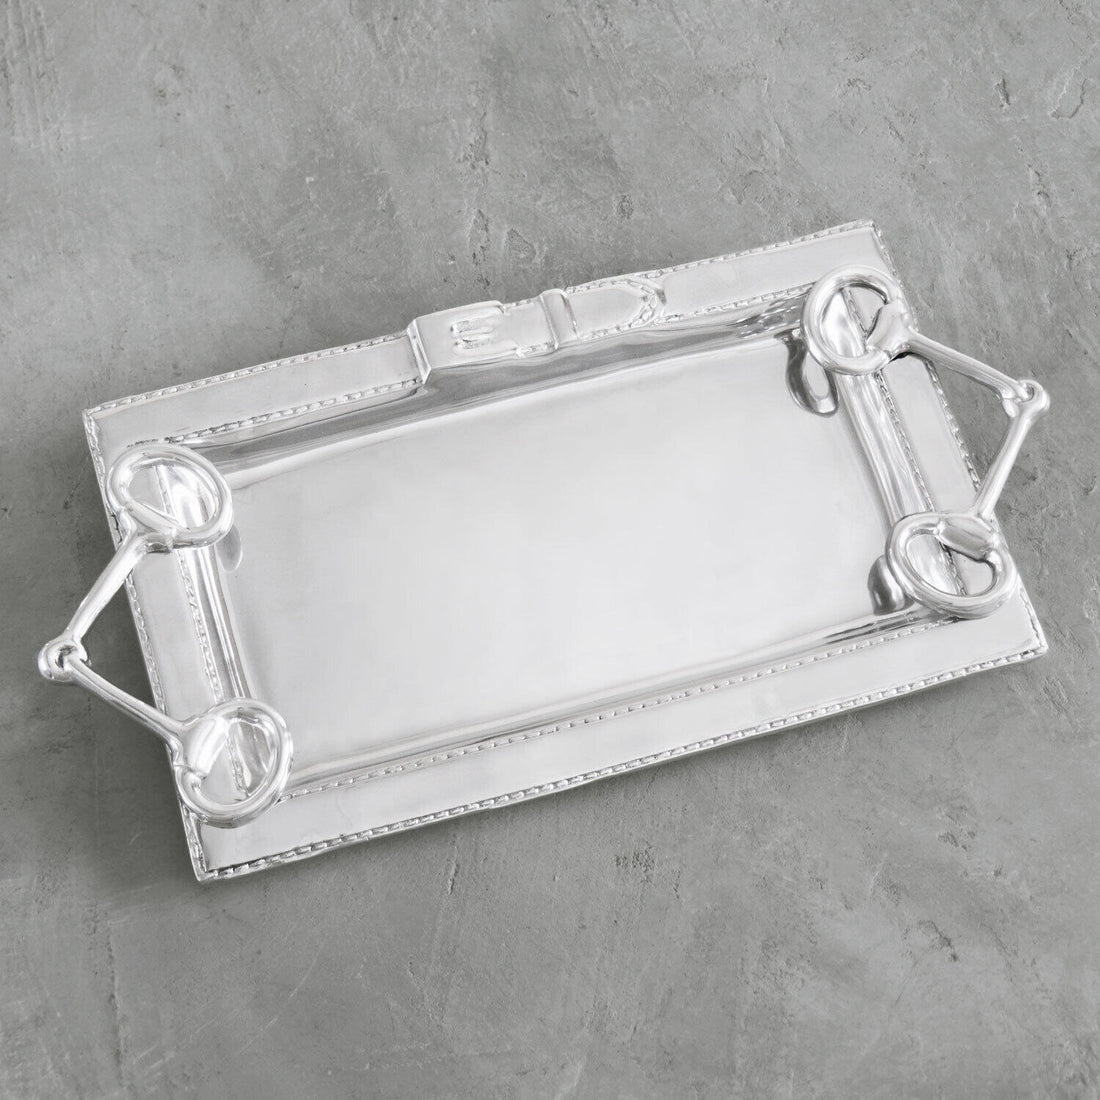 WESTERN Equestrian Large Tray with Handles